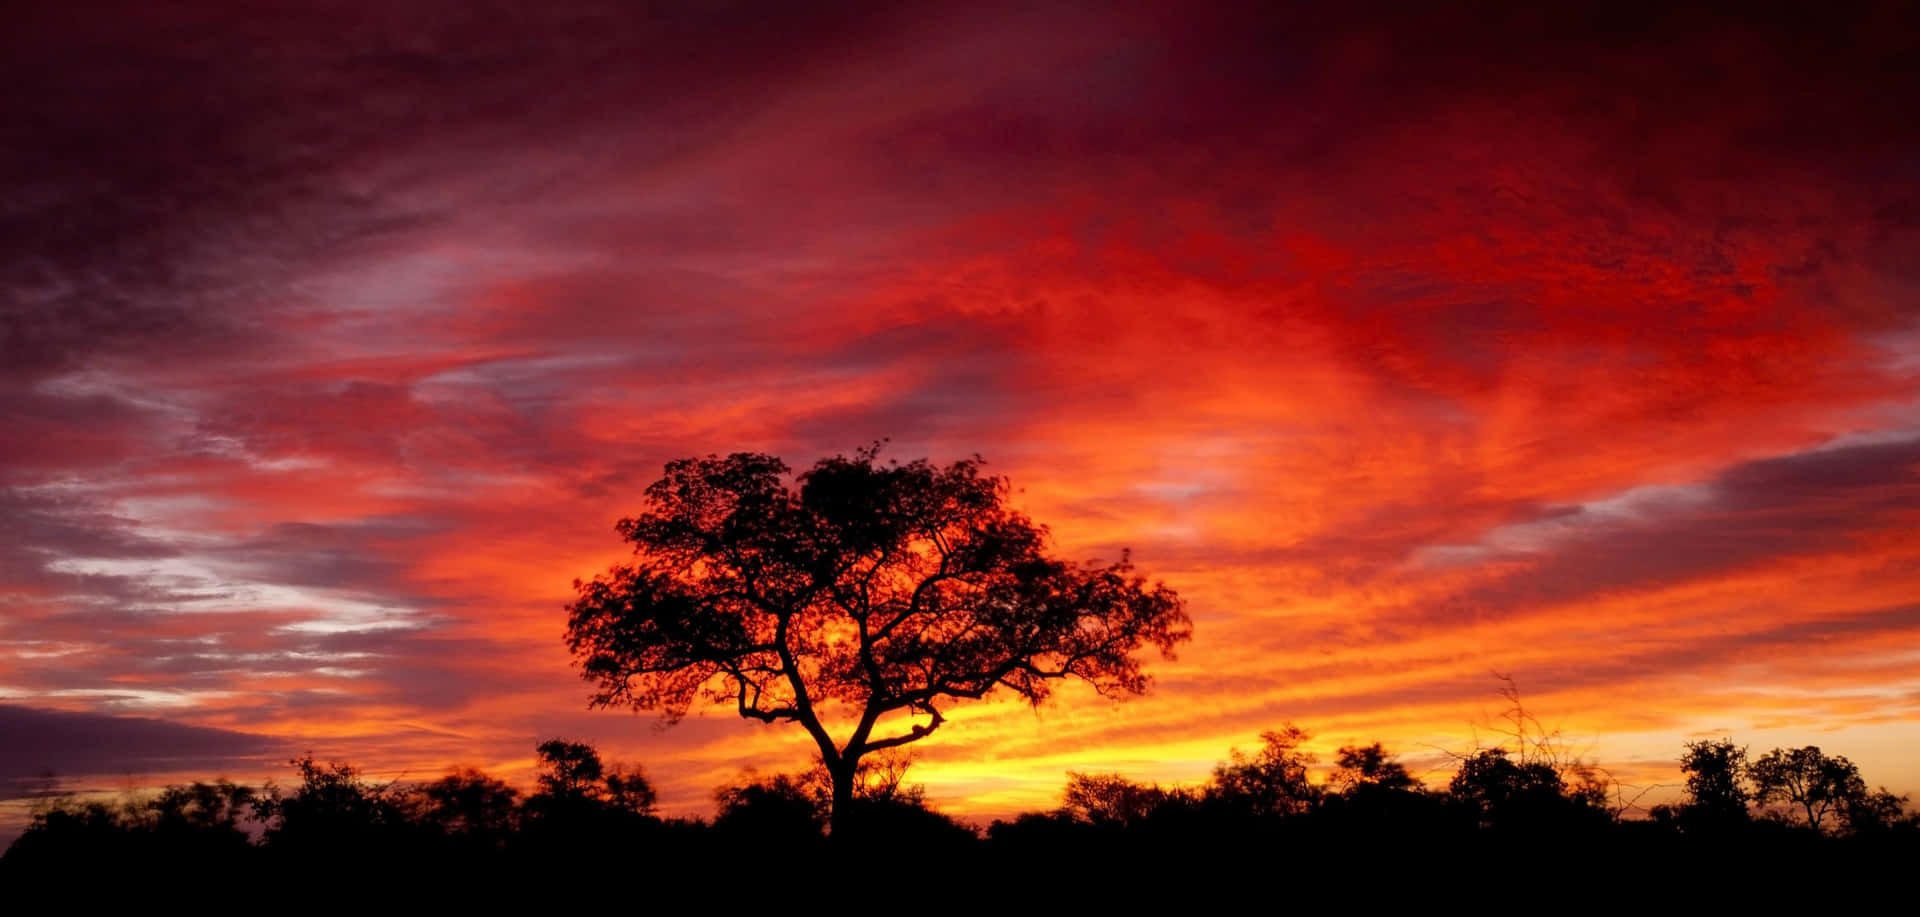 With its ancient culture and lush wildlife, Africa is a photographer's dream.